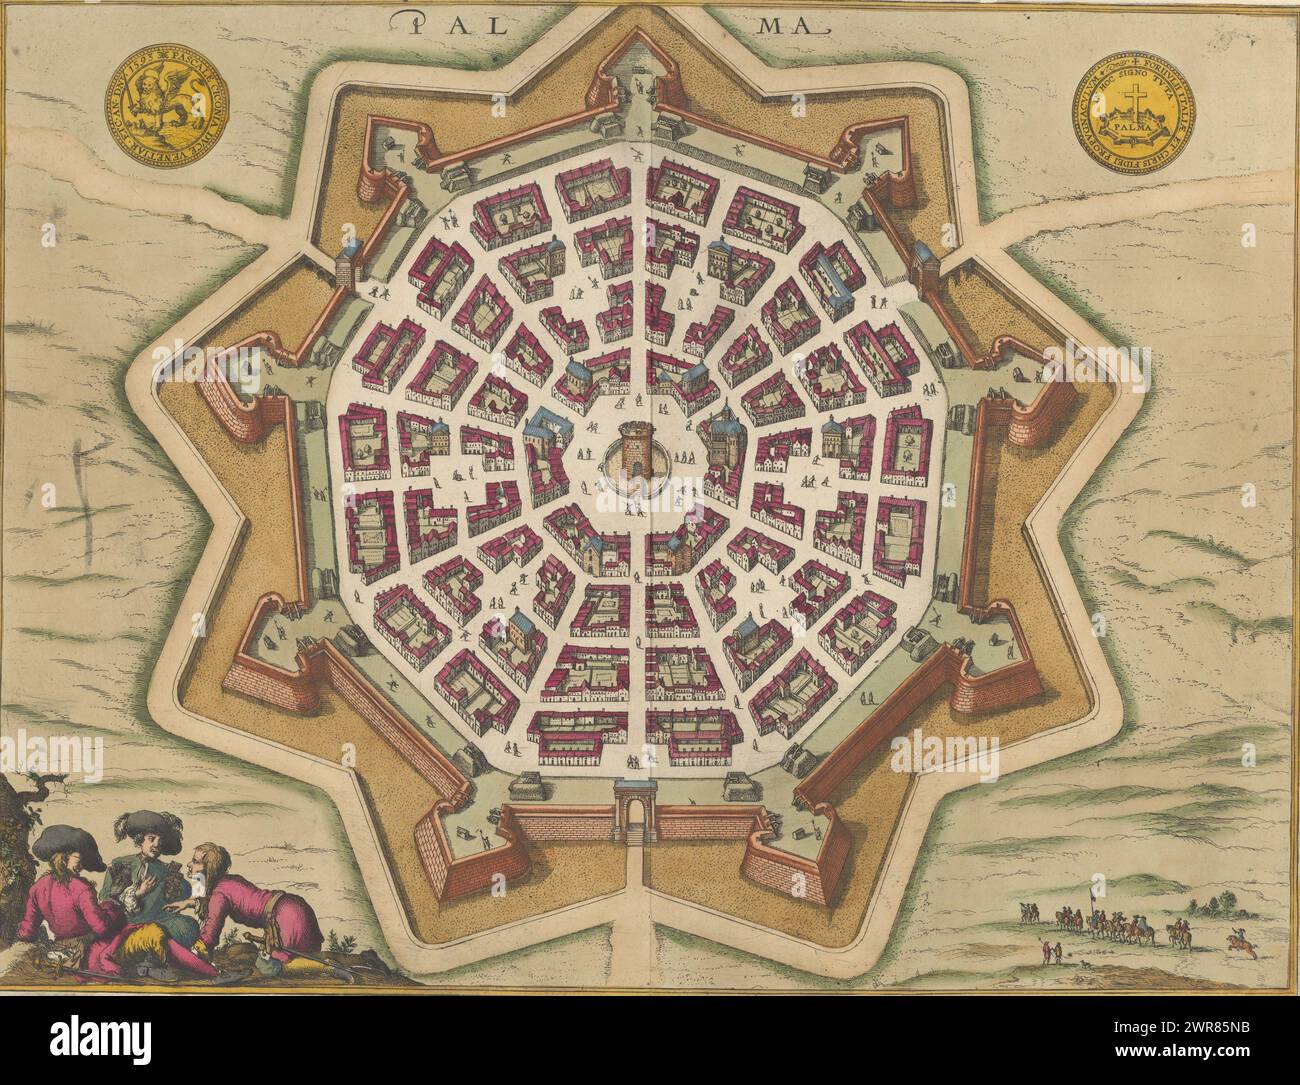 Bird's-eye view of Palmanova, Palma (title on object), Bird's-eye view of Palmanova. Bottom left three soldiers playing cards. Print is part of an album., print maker: anonymous, Anna Beeck, The Hague, 1600 - 1699 and/or 1693 - 1717, paper, etching, height 355 mm × width 468 mm, print Stock Photo